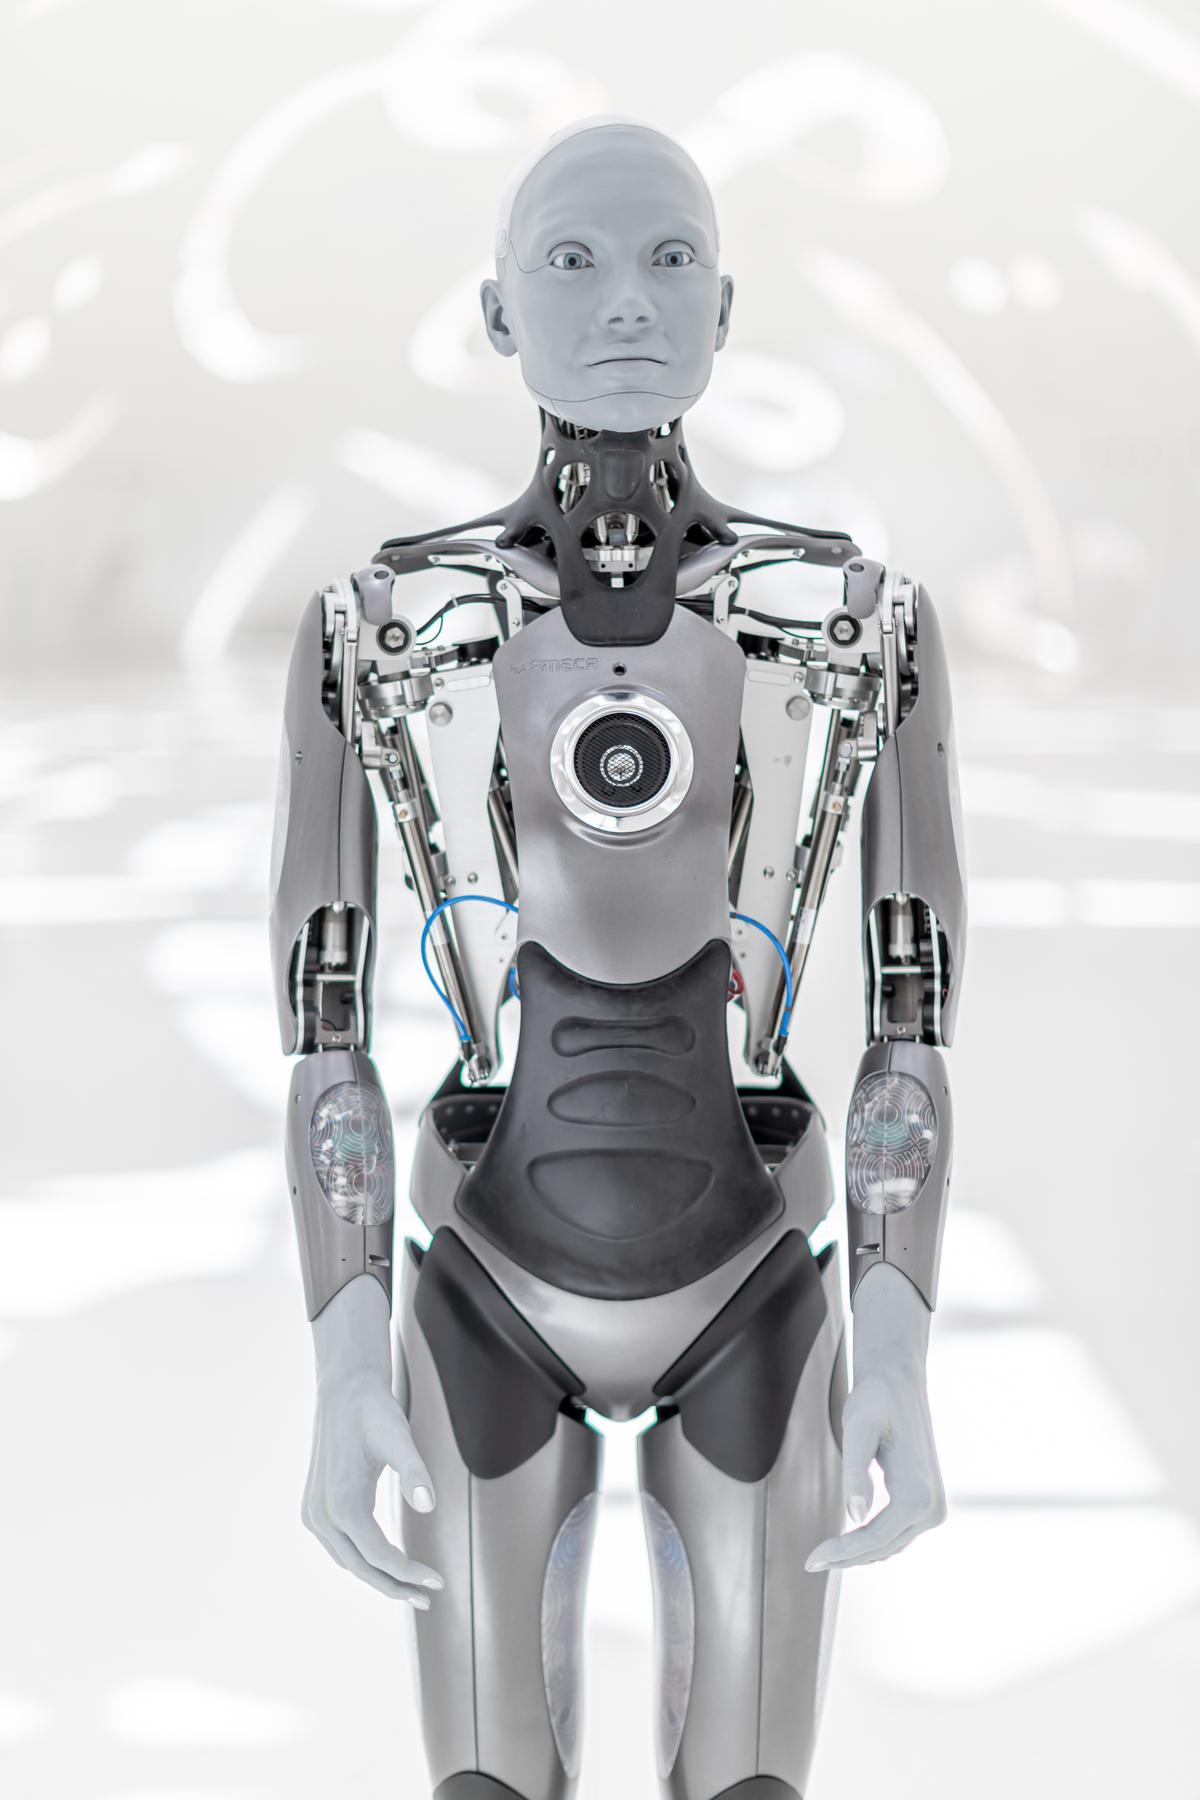 Created by Cornwall-based Engineered Arts, Ameca, touted to be the world’s most advanced humanoid robot is designed as a platform for AI development